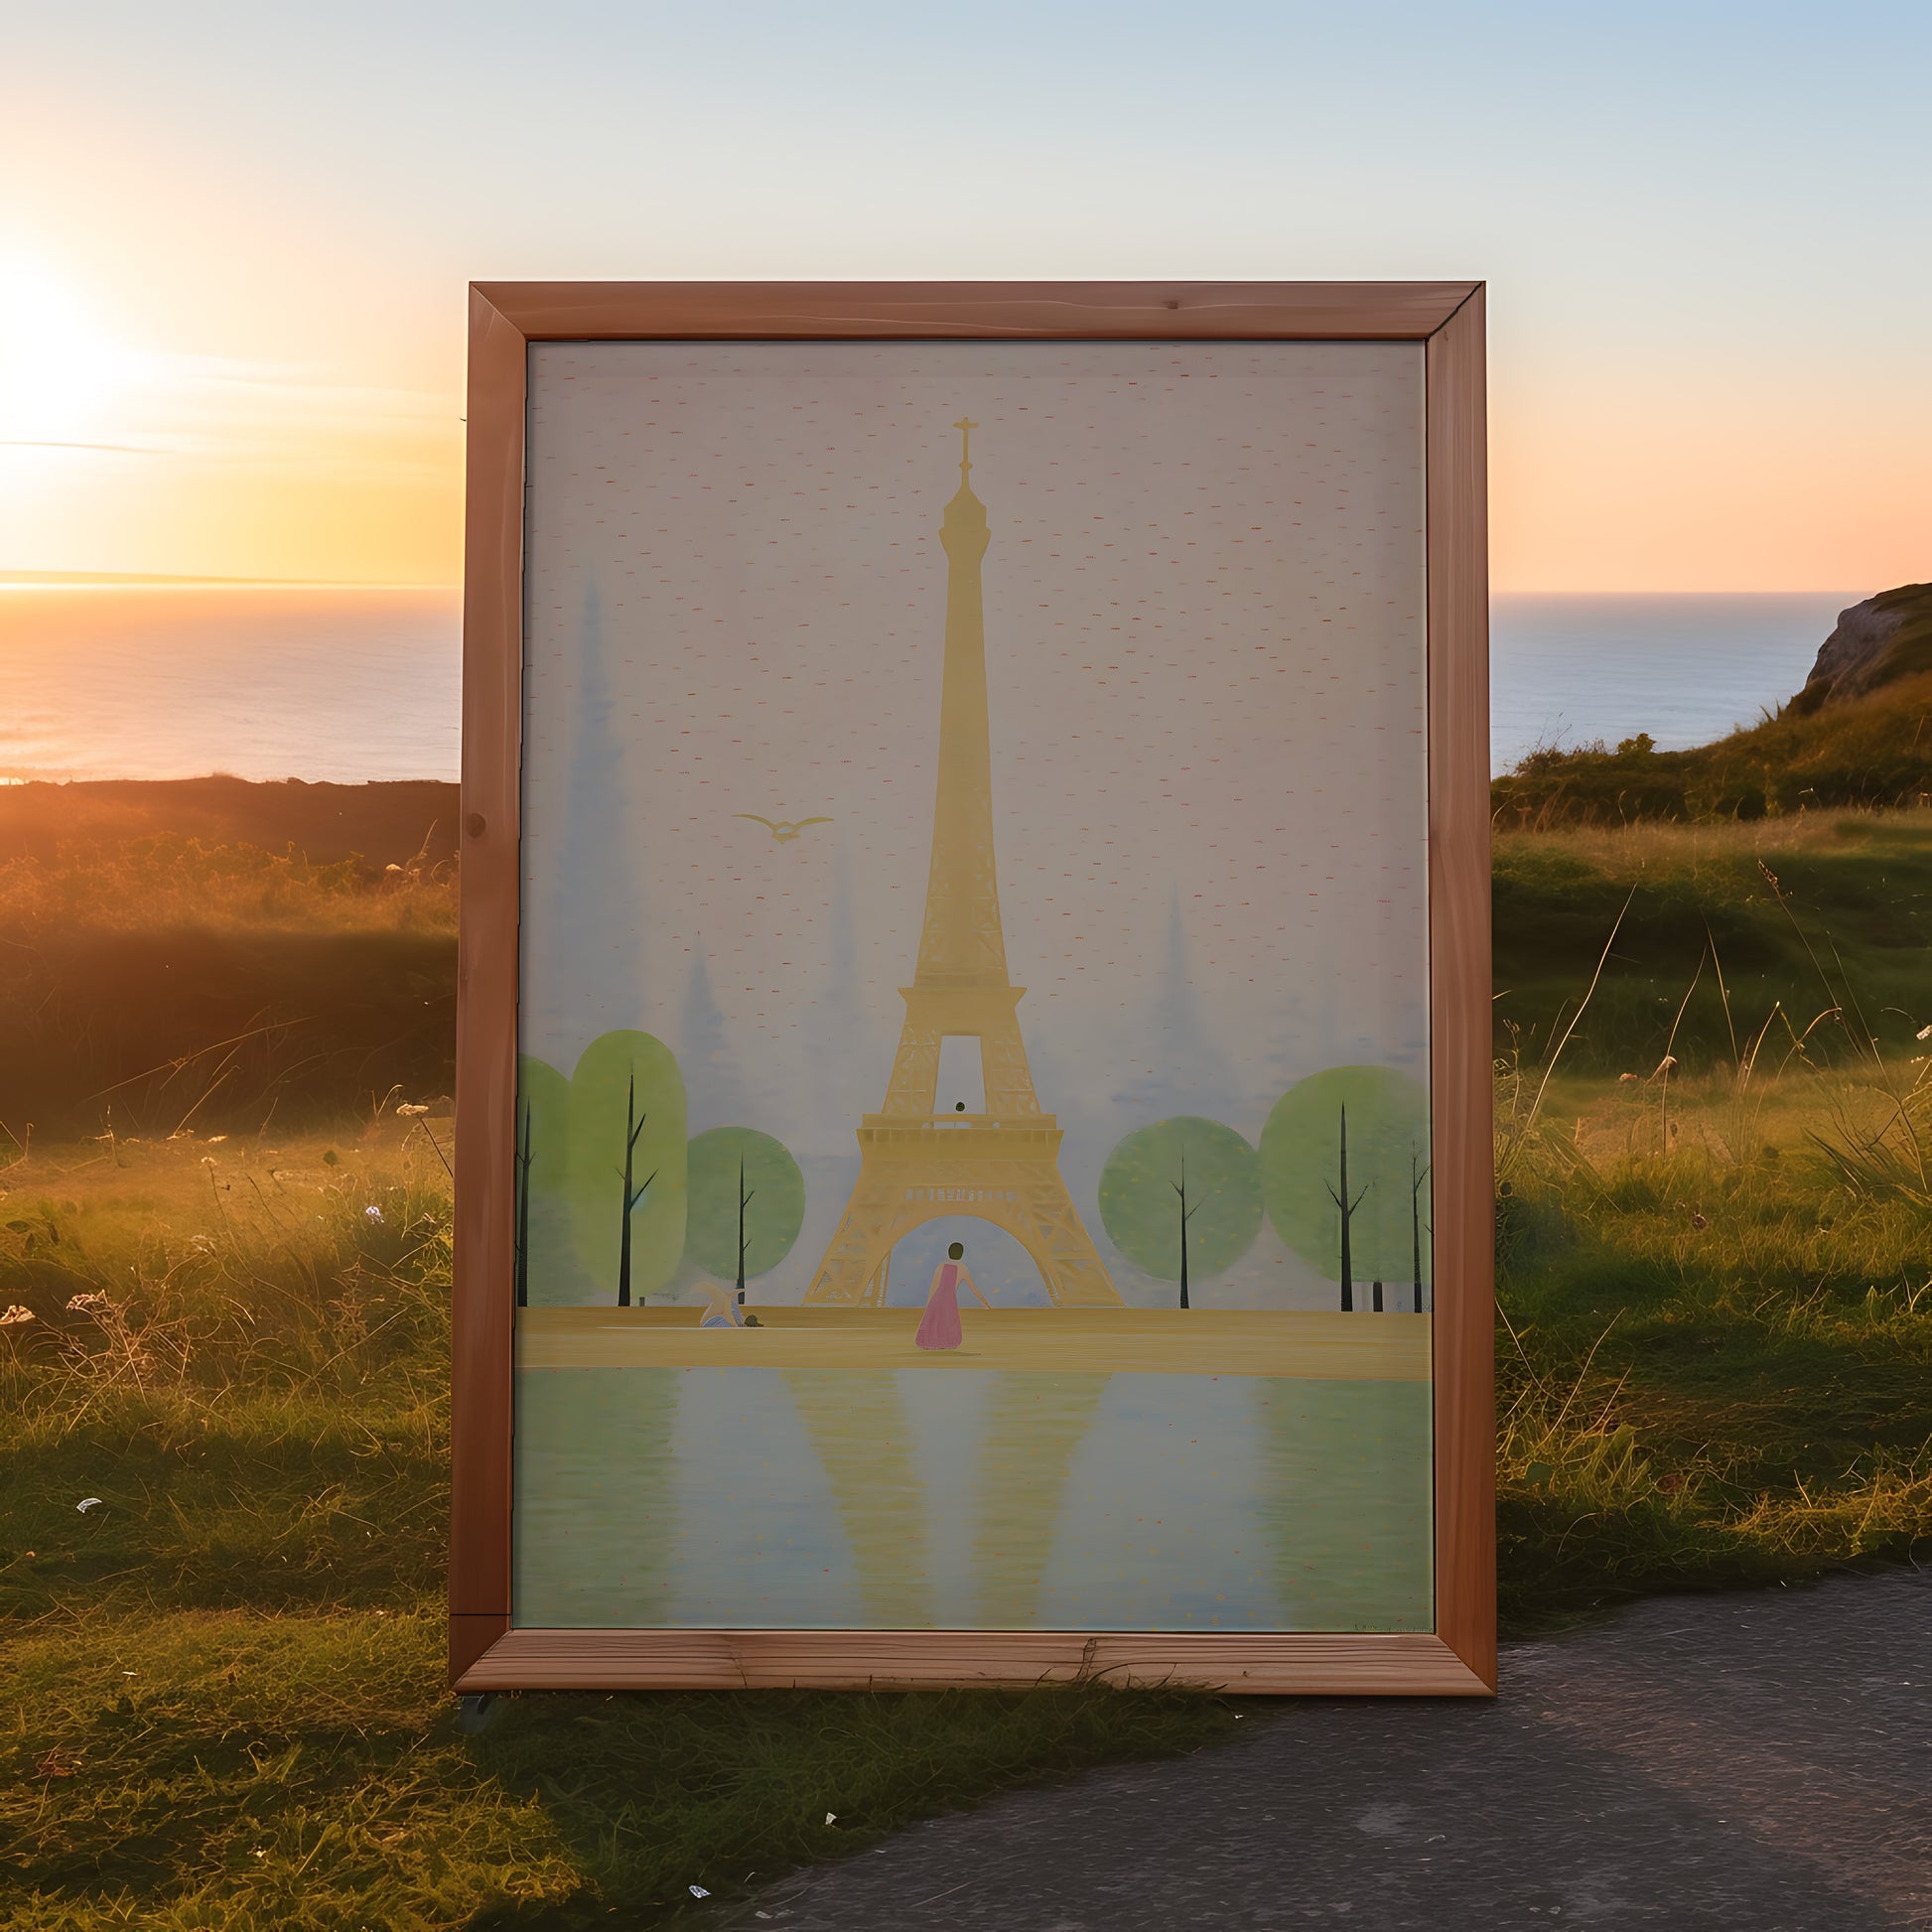 A framed picture of the Eiffel Tower at sunrise placed outdoors.